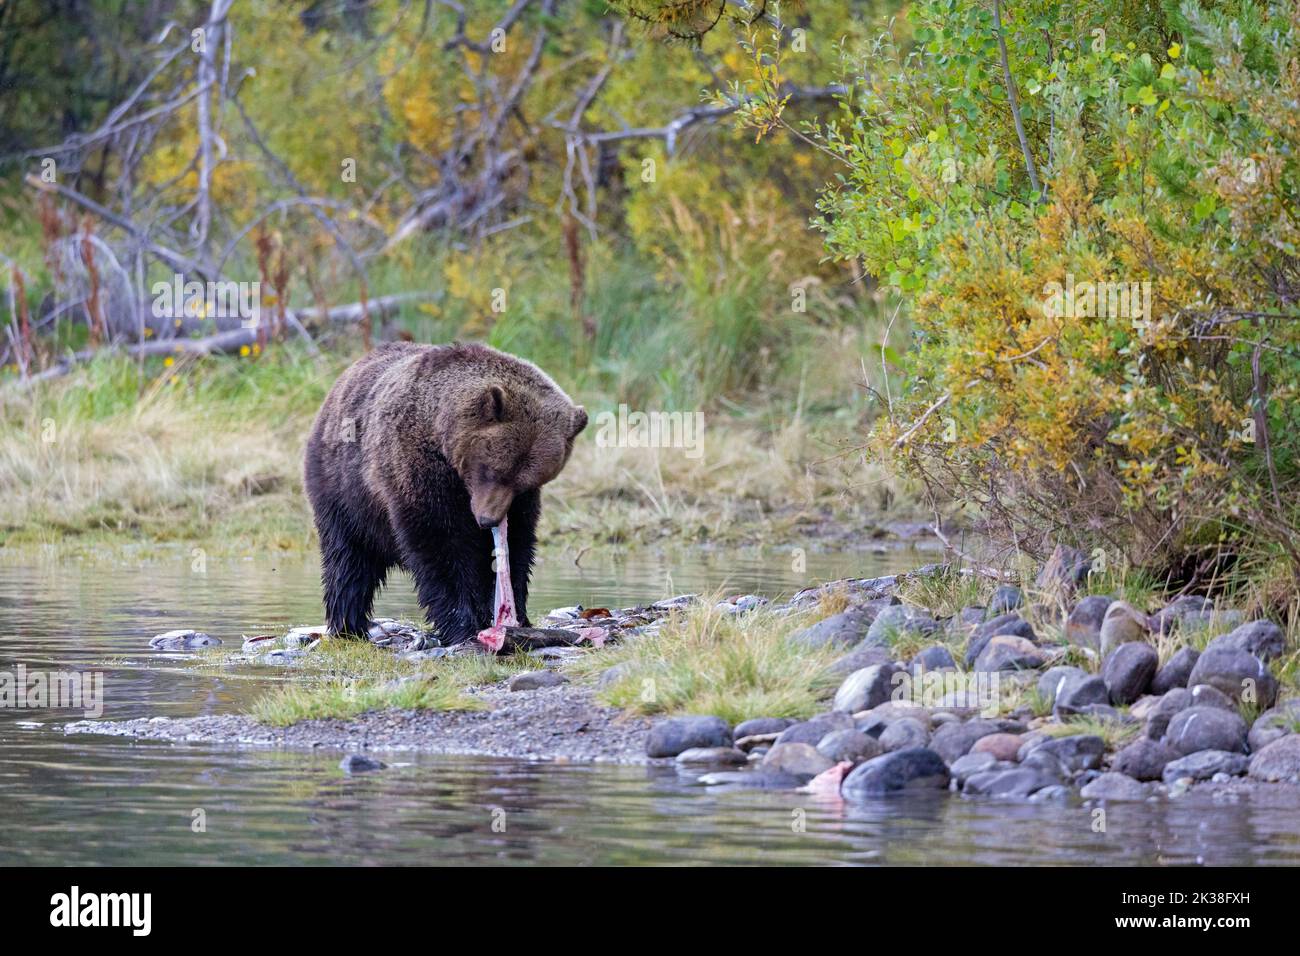 Grizzly Bear Eating Fish Stock Photo